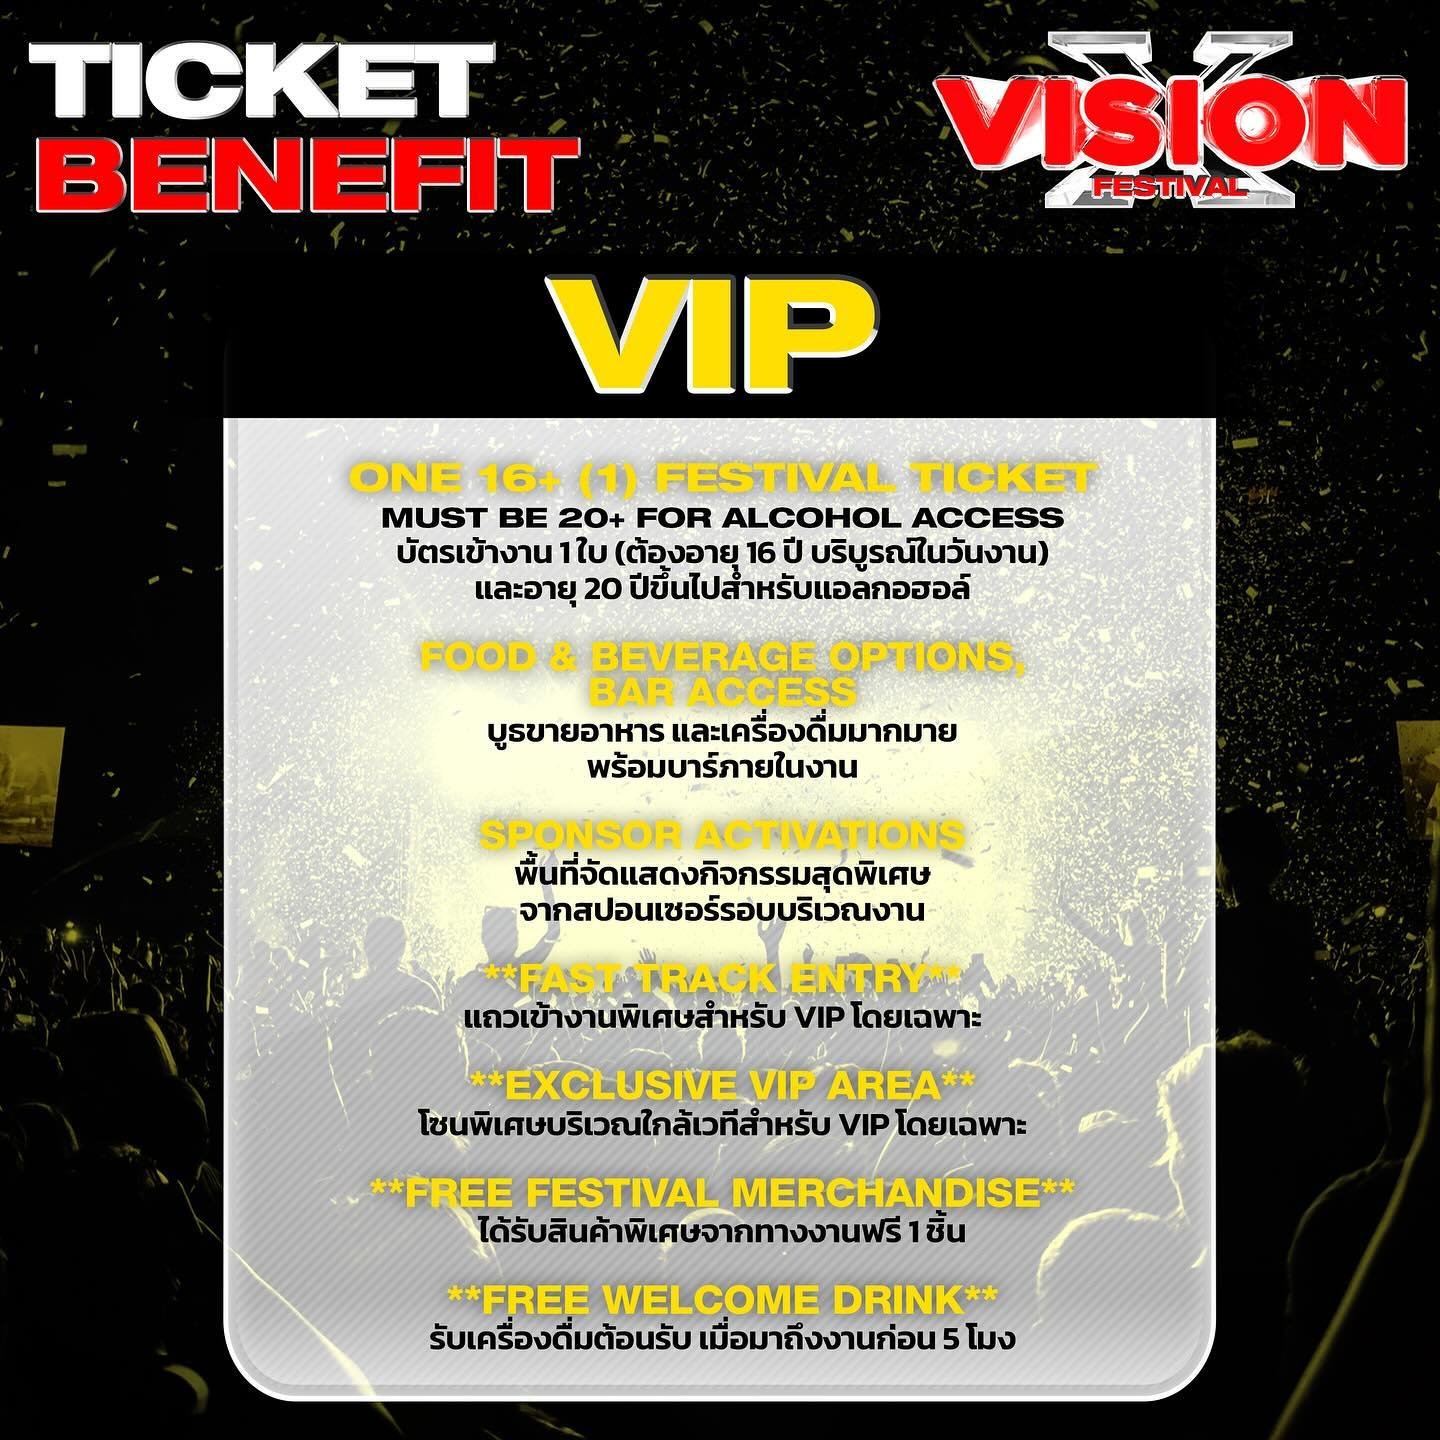 Get exclusive benefits with our VIP tickets 😍🔥 Free merchandise (1 piece) with welcome drink, fast entry and special area just for our VIPs ‼️

รับสิทธิพิเศษมากมายกับบัตร VIP ของเรา 😍🔥 คุณจะได้รับสินค้าจากทางงานฟรี 1 ชิ้น พร้อมเครื่องดื่มต้อนรับ 